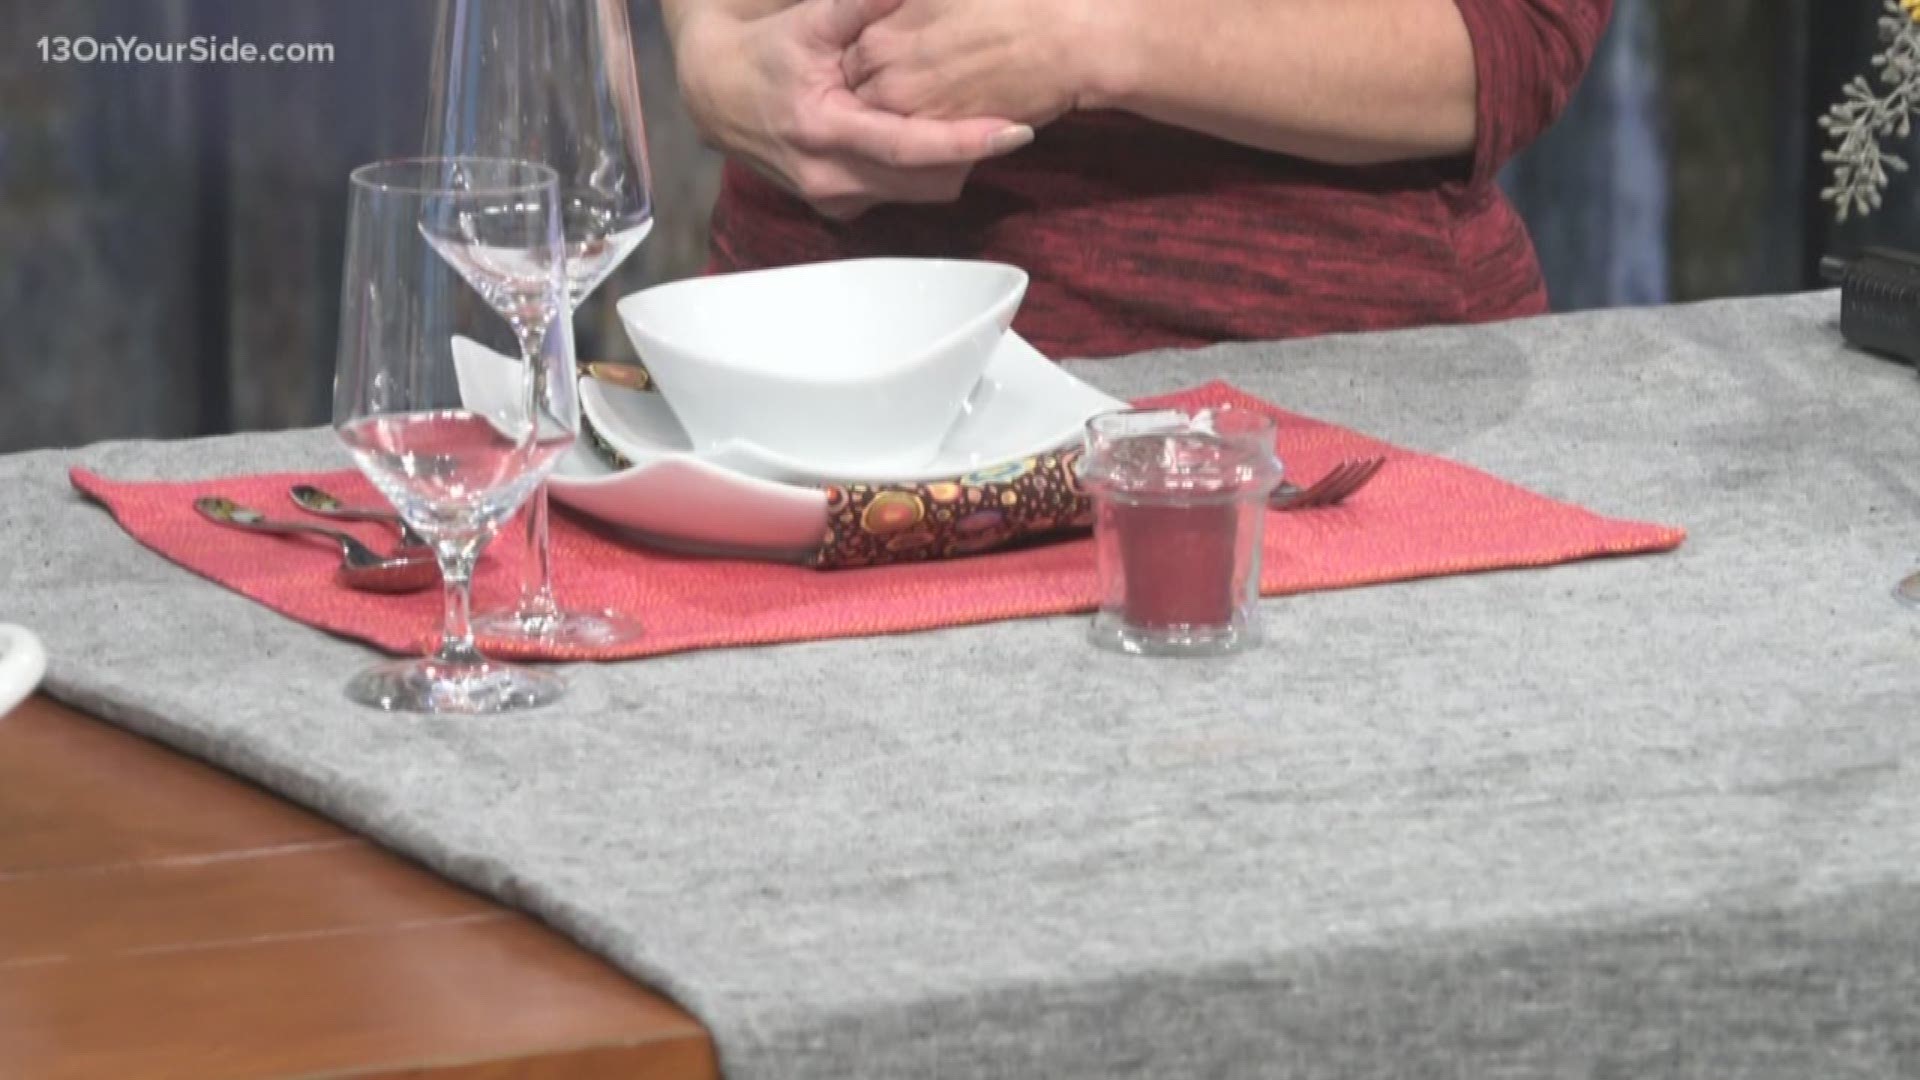 Check out these tips on how to put together a festive and functional Thanksgiving table setting.